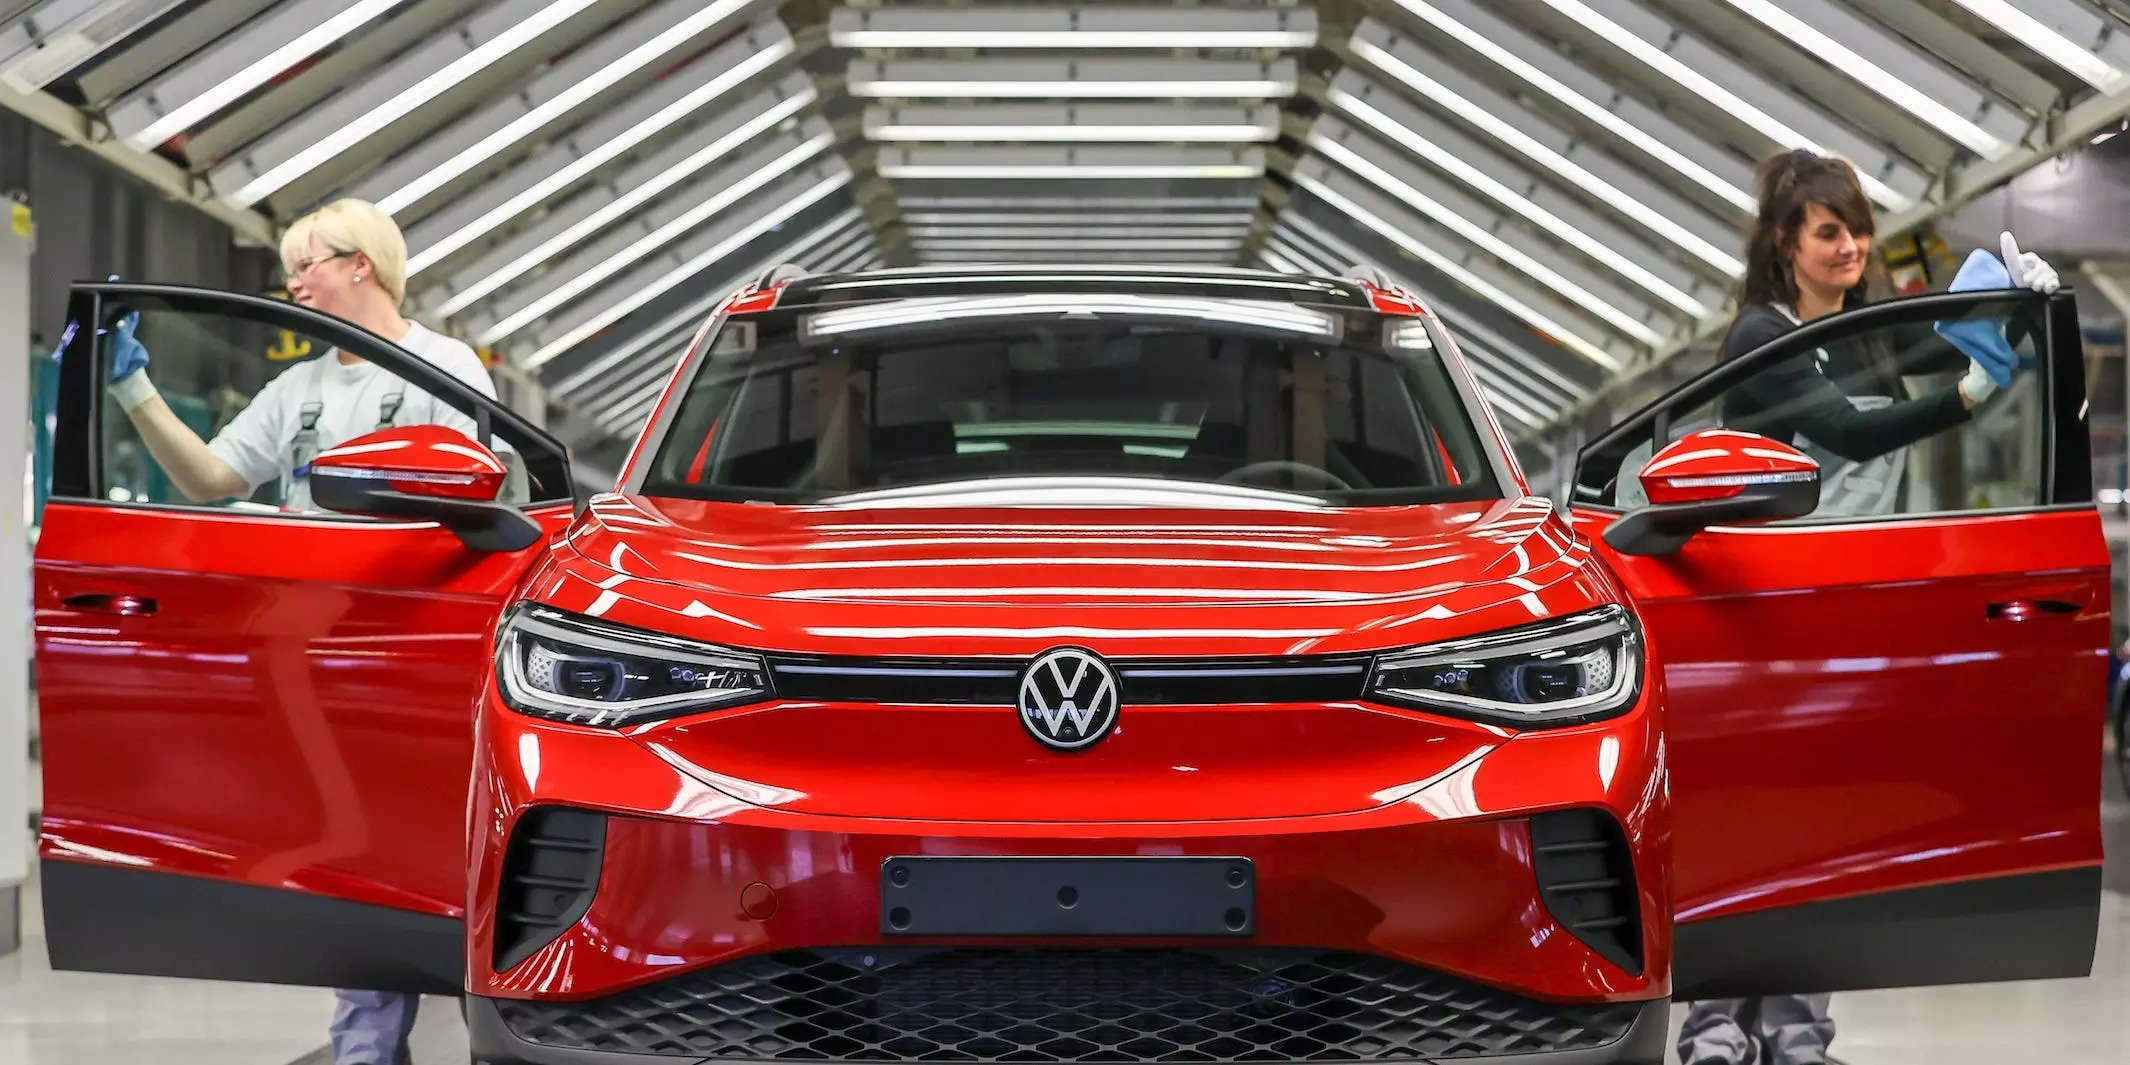 Europe’s energy crisis could give Volkswagen a 0 million business windfall from early natural gas security, report says